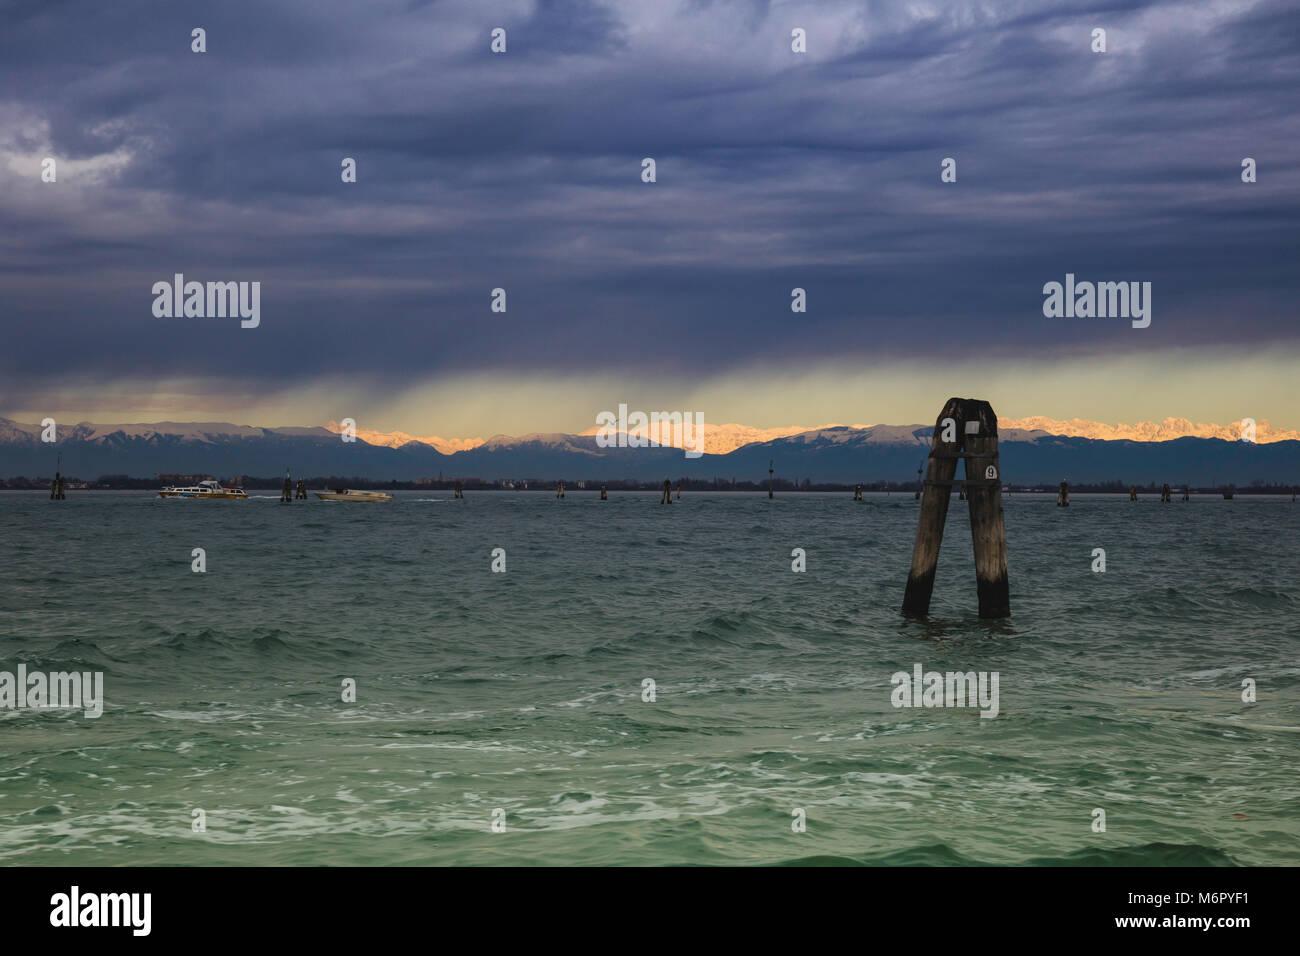 Venetian Laguna during a storm in the background of snowy Alps sunlit Stock Photo